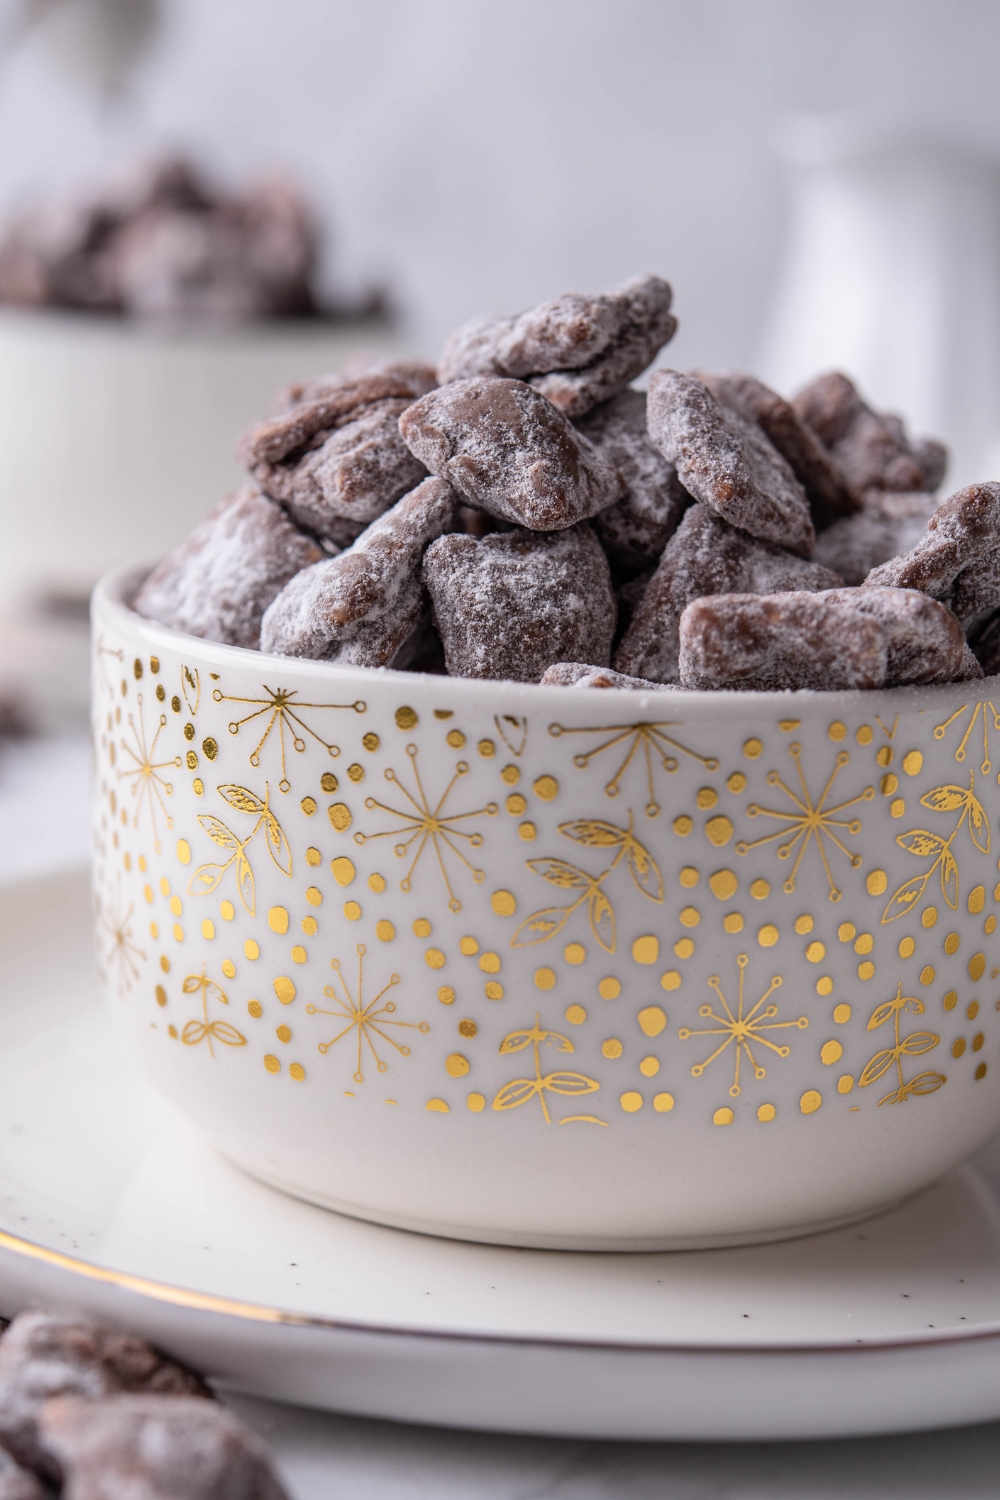 A festive bowl with puppy chow piled high.